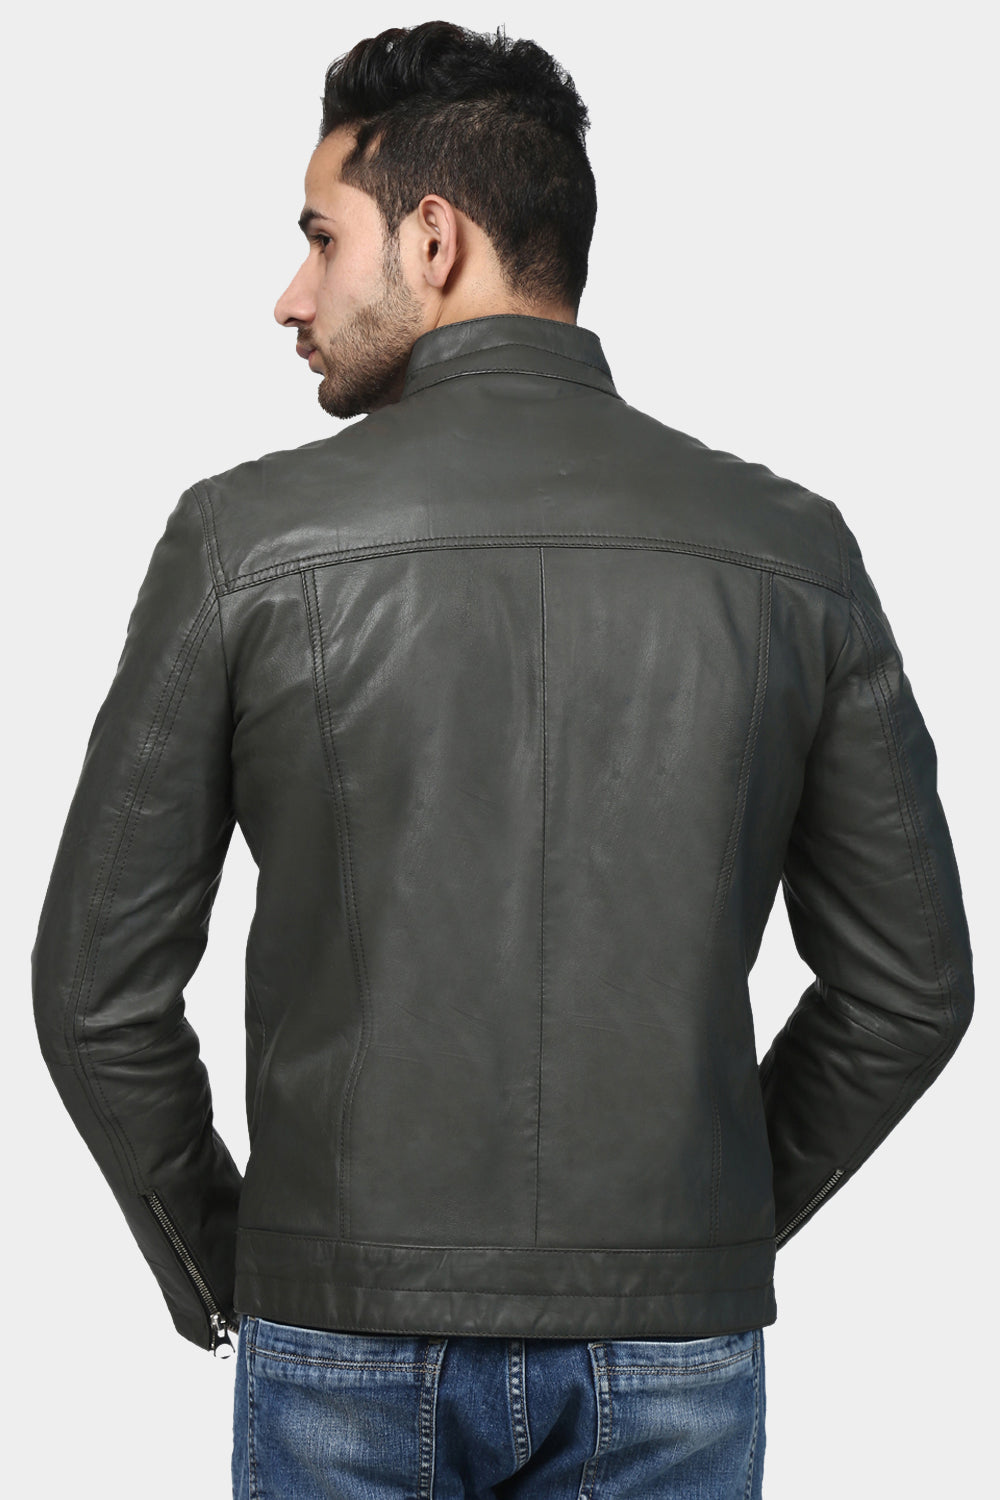 Justanned Anchor Grey Jacket